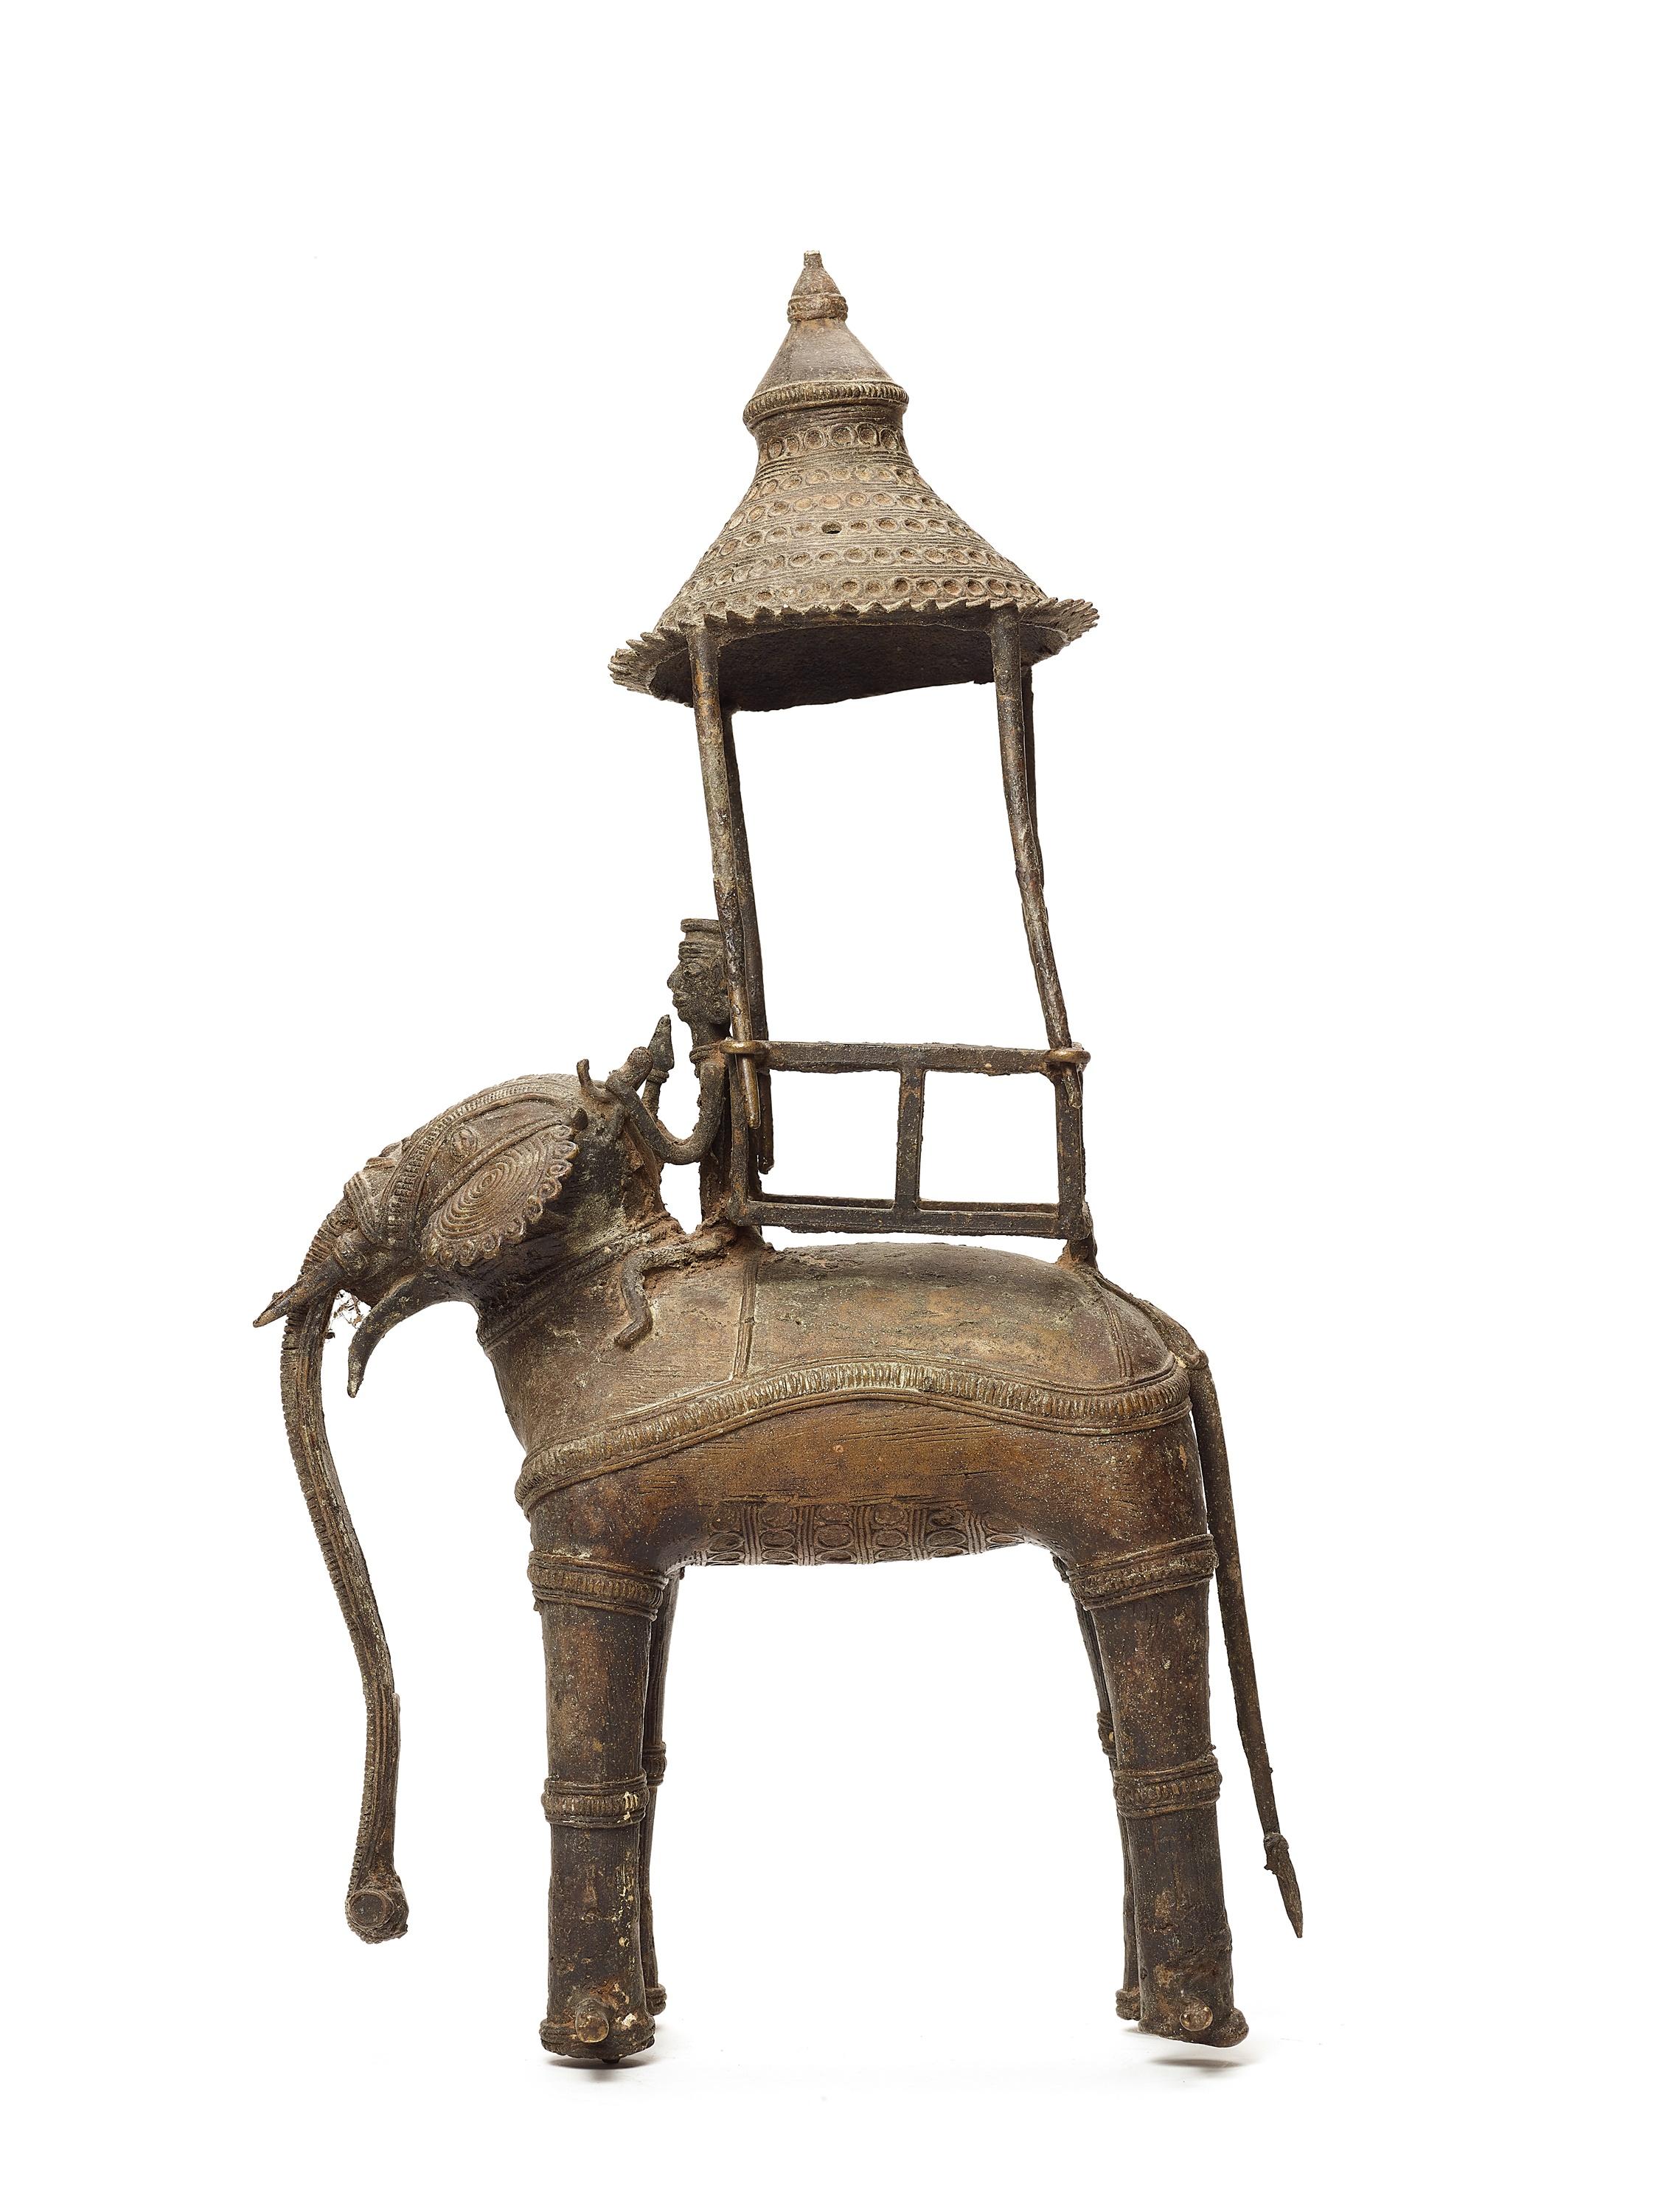 A bastar bronze of an elephant with Howdah, india, 19th-20th century

This very large figure of elephant consists of two parts, the elephant itself and the umbrella with a lotus bud on top. The head of the elephant is remarkably well decorated